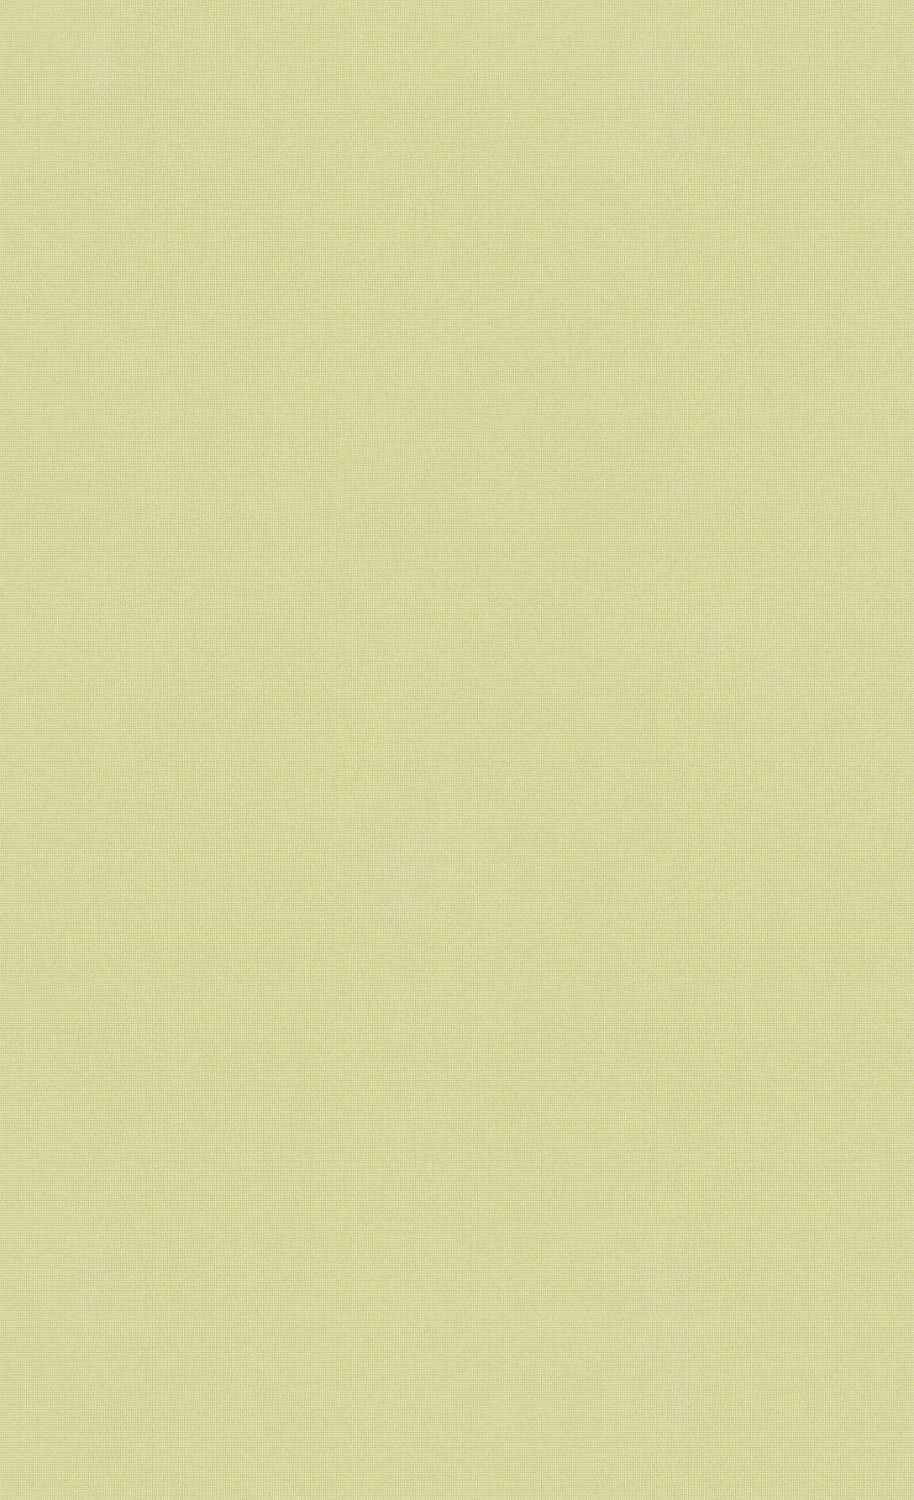 Minimalist Olive Green Wallpaper C7287 | Commercial and Hospitality